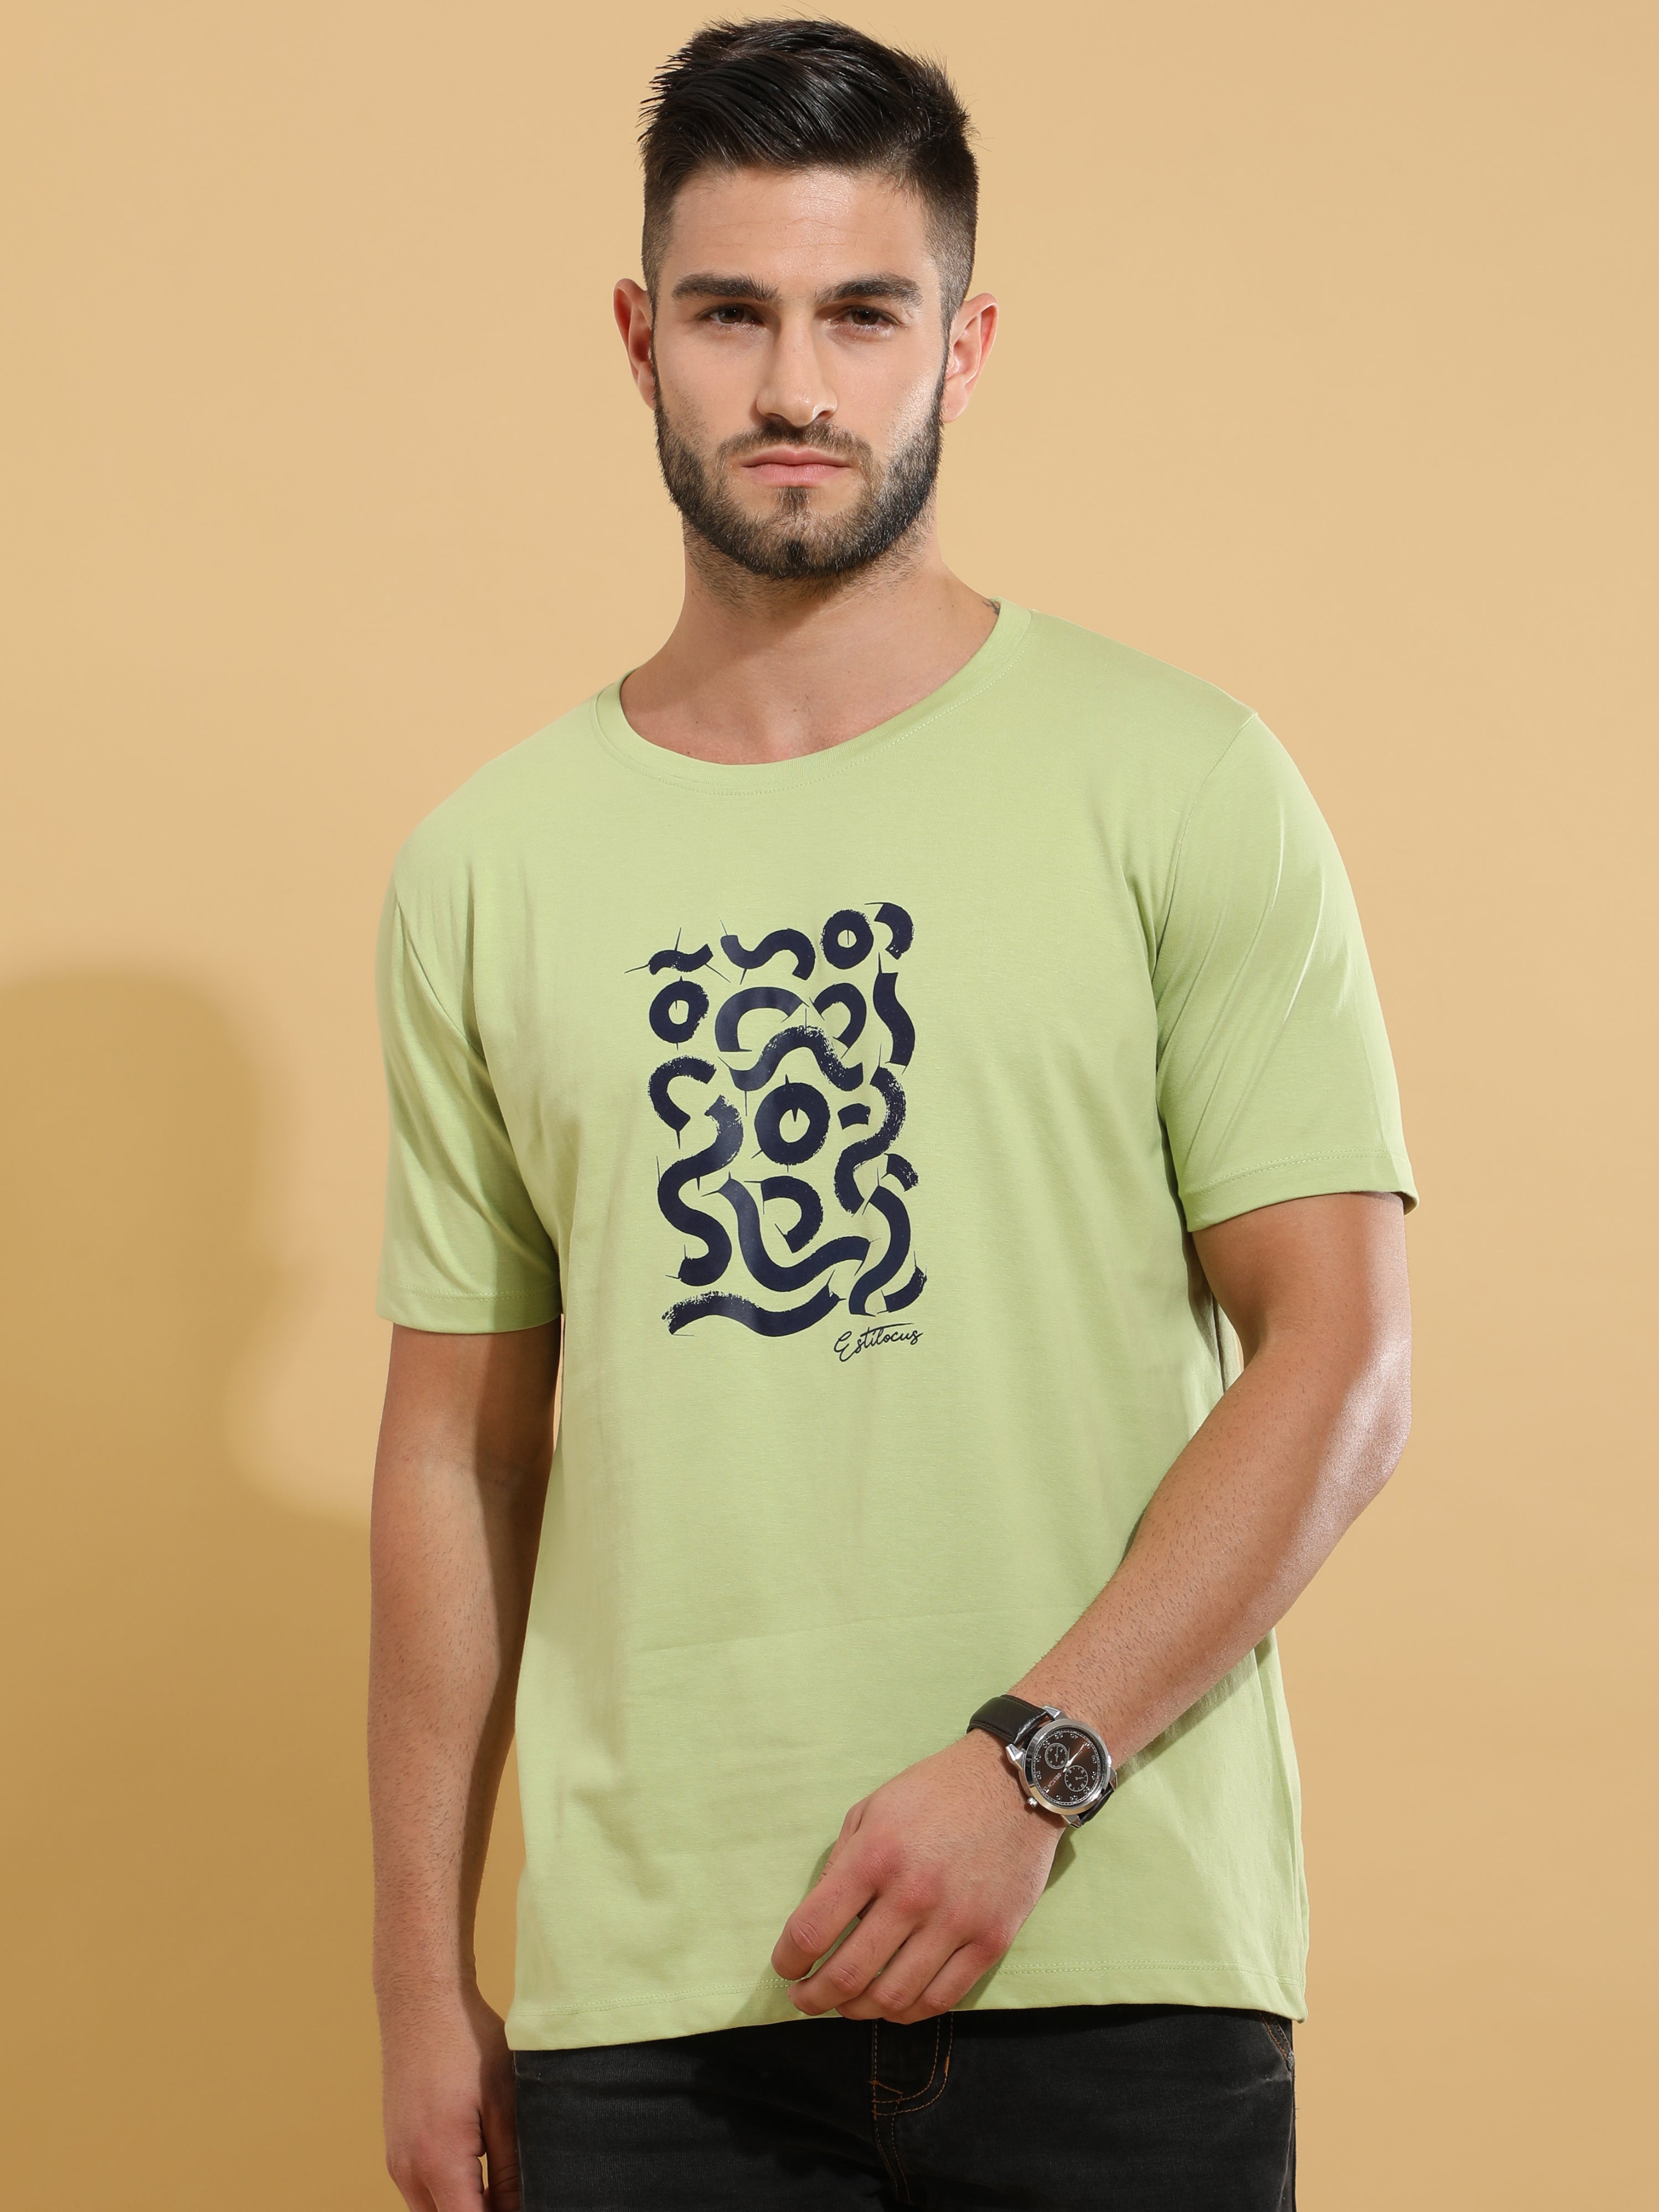 Green Snake Crewneck T-Shirt | Mens Wear shop online at Estilocus. Buy Green Snake Crewneck T-Shirt in different sizes and colors online. Shop For Mens Wear with a wide range of Brand New Collections in latest styles only at ESTILOCUS. *Free Shipping *COD